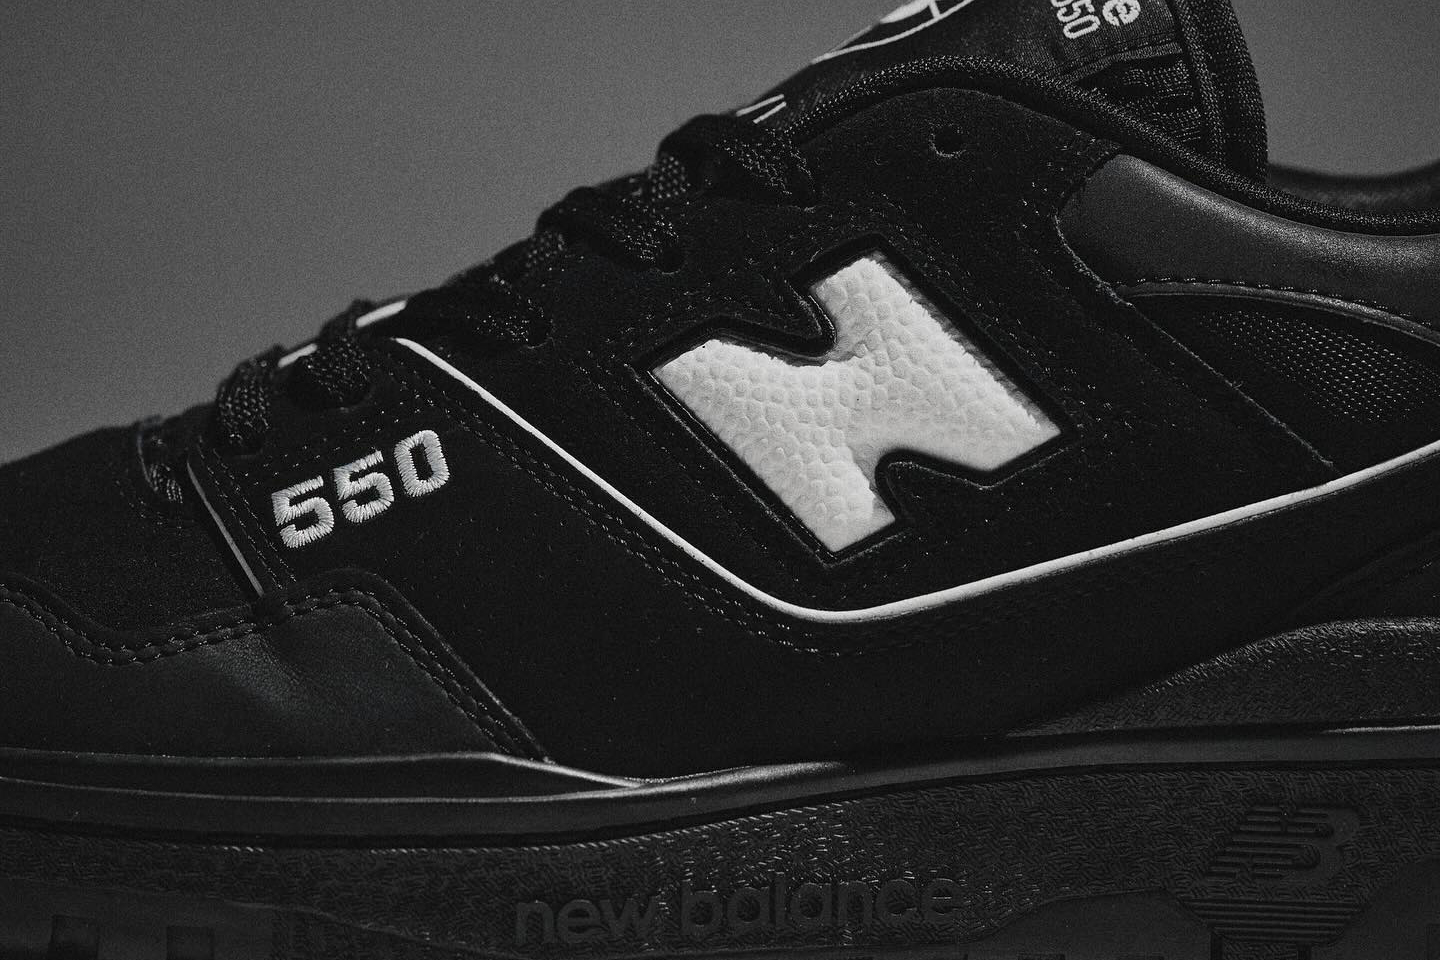 atmos new balance 550 back in black